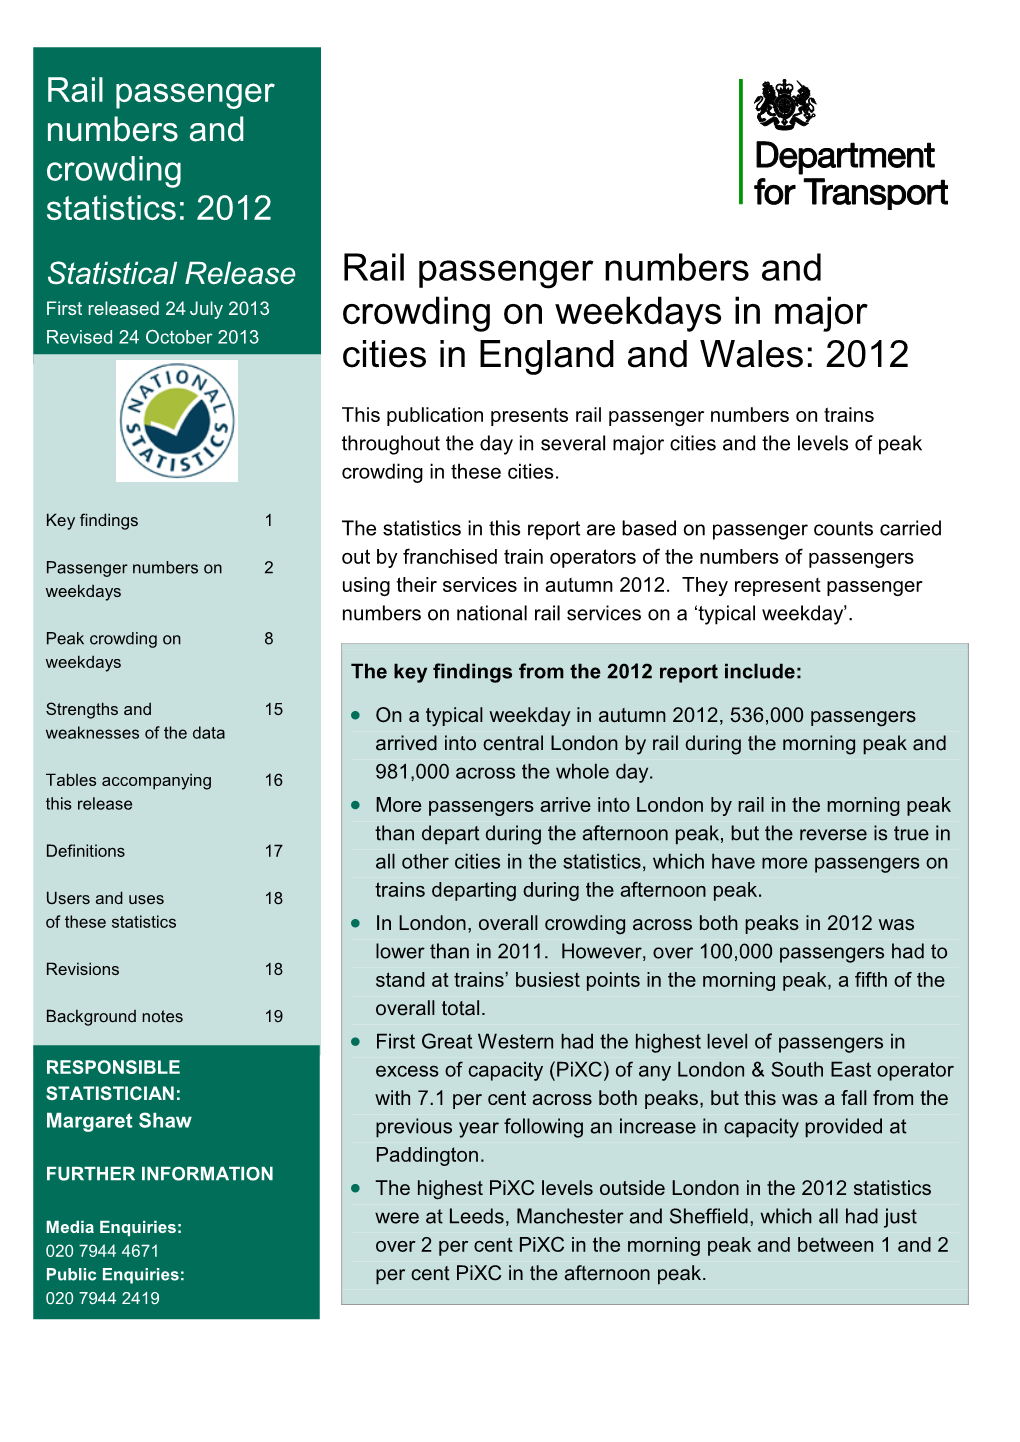 Rail Passenger Numbers and Crowding on Weekdays in Major Cities in England and Wales: 2012 Page 2 of 19